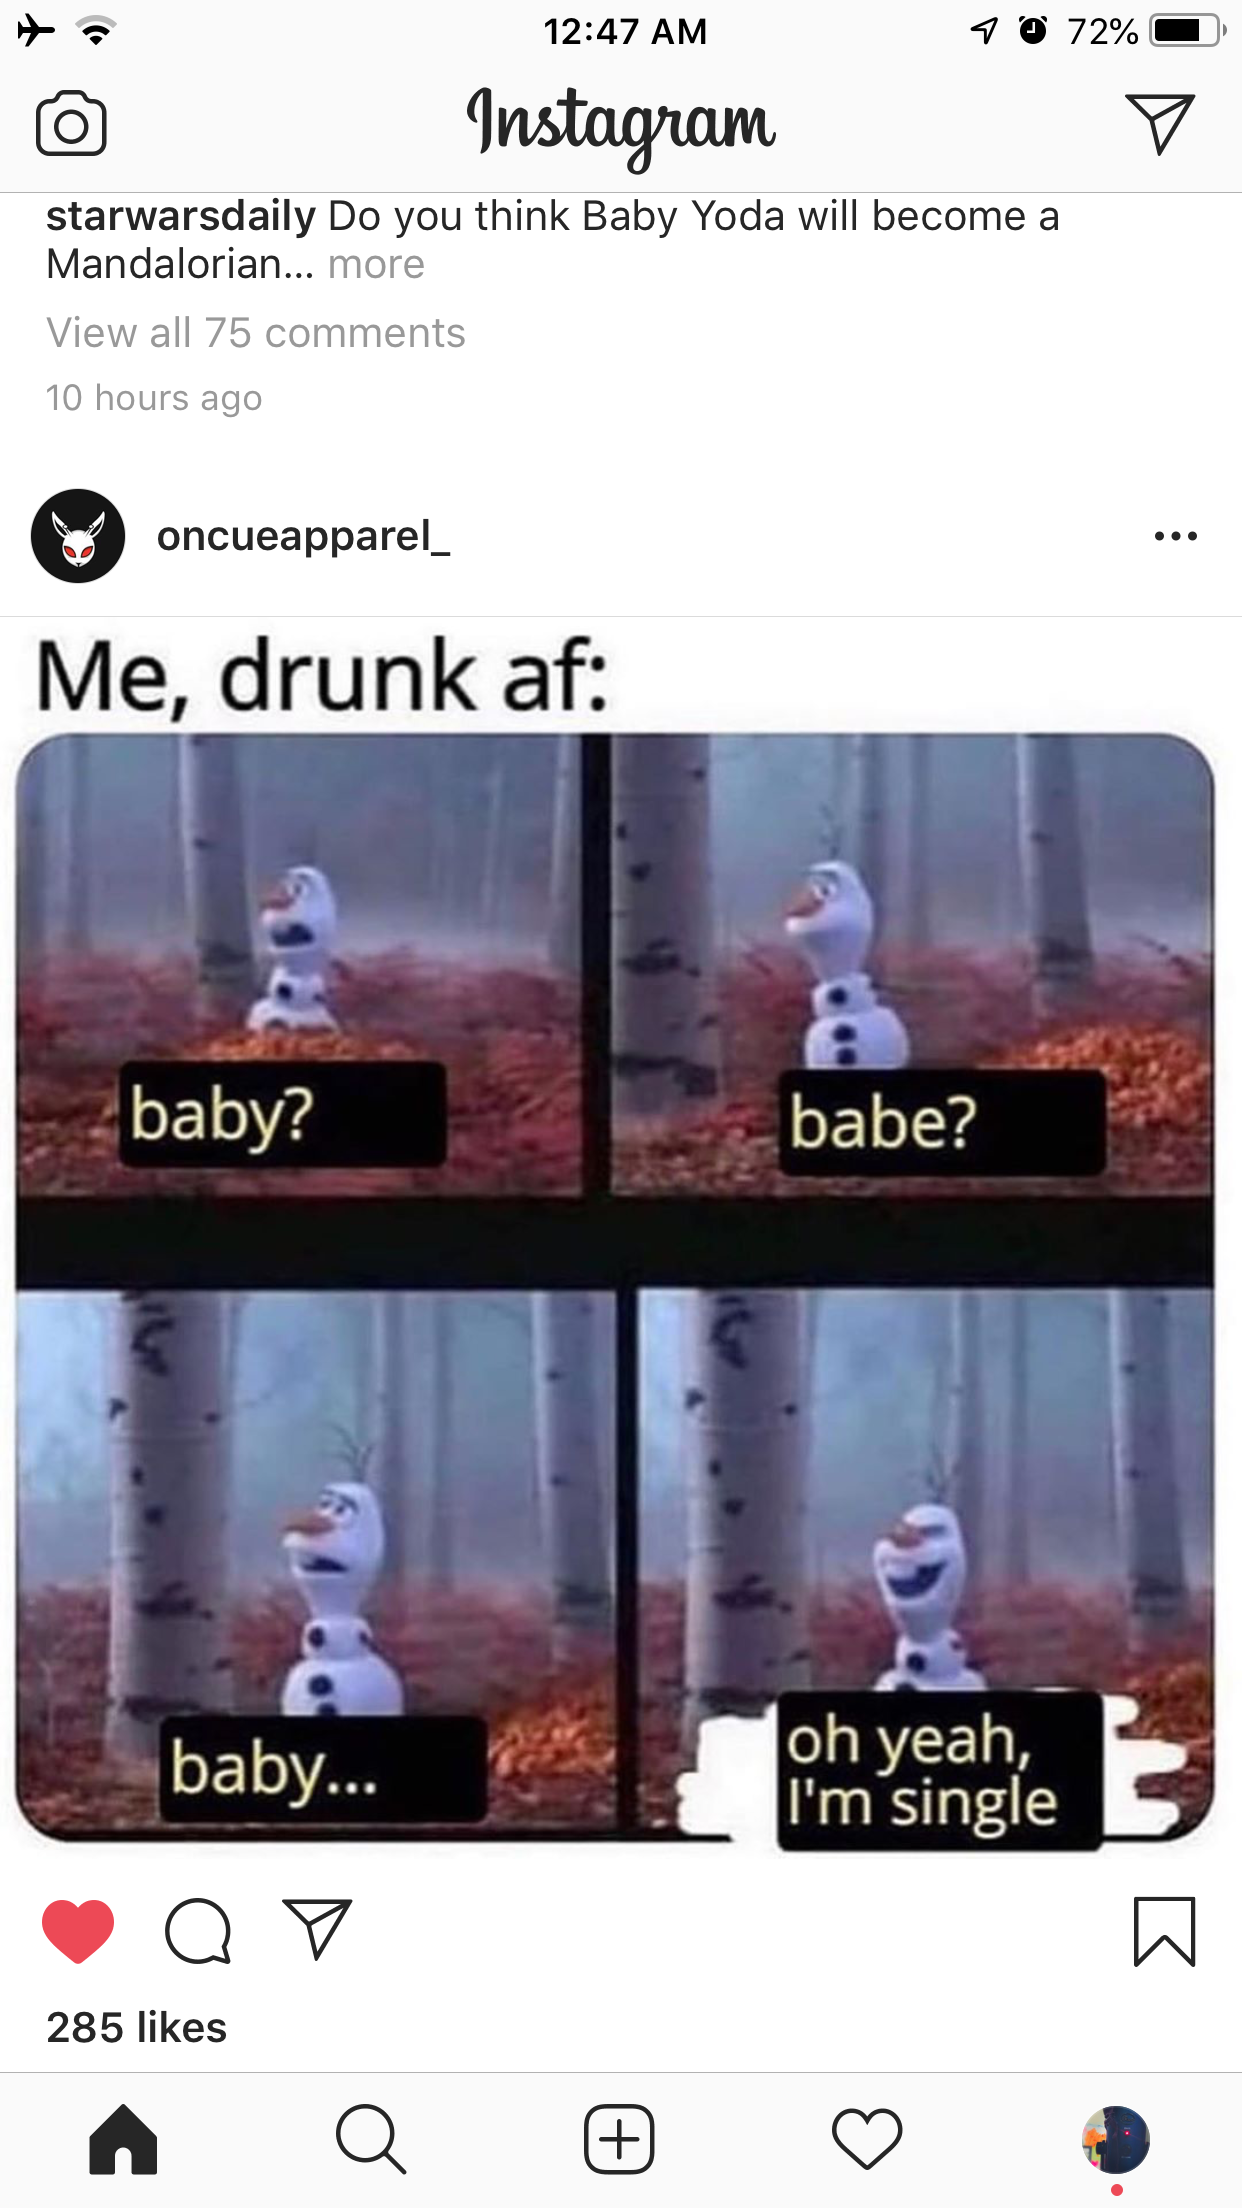 oh yeah i m single - 70 72% o Instagram starwarsdaily Do you think Baby Yoda will become a Mandalorian... more View all 75 10 hours ago oncueapparet Me, drunk af baby? babe? baby... oh yeah, I'm single Op 285